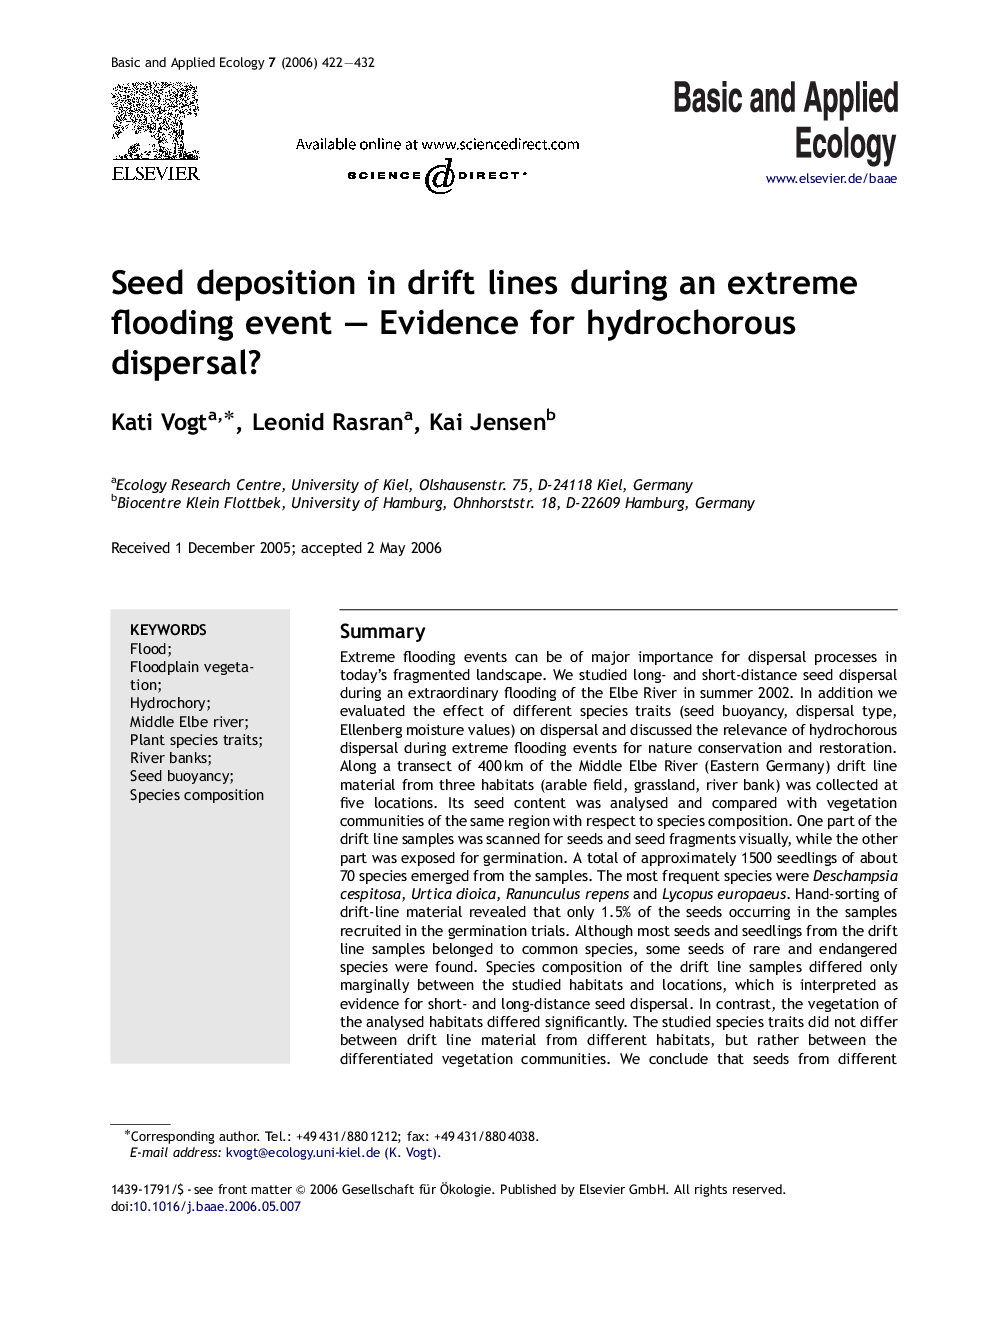 Seed deposition in drift lines during an extreme flooding event — Evidence for hydrochorous dispersal?